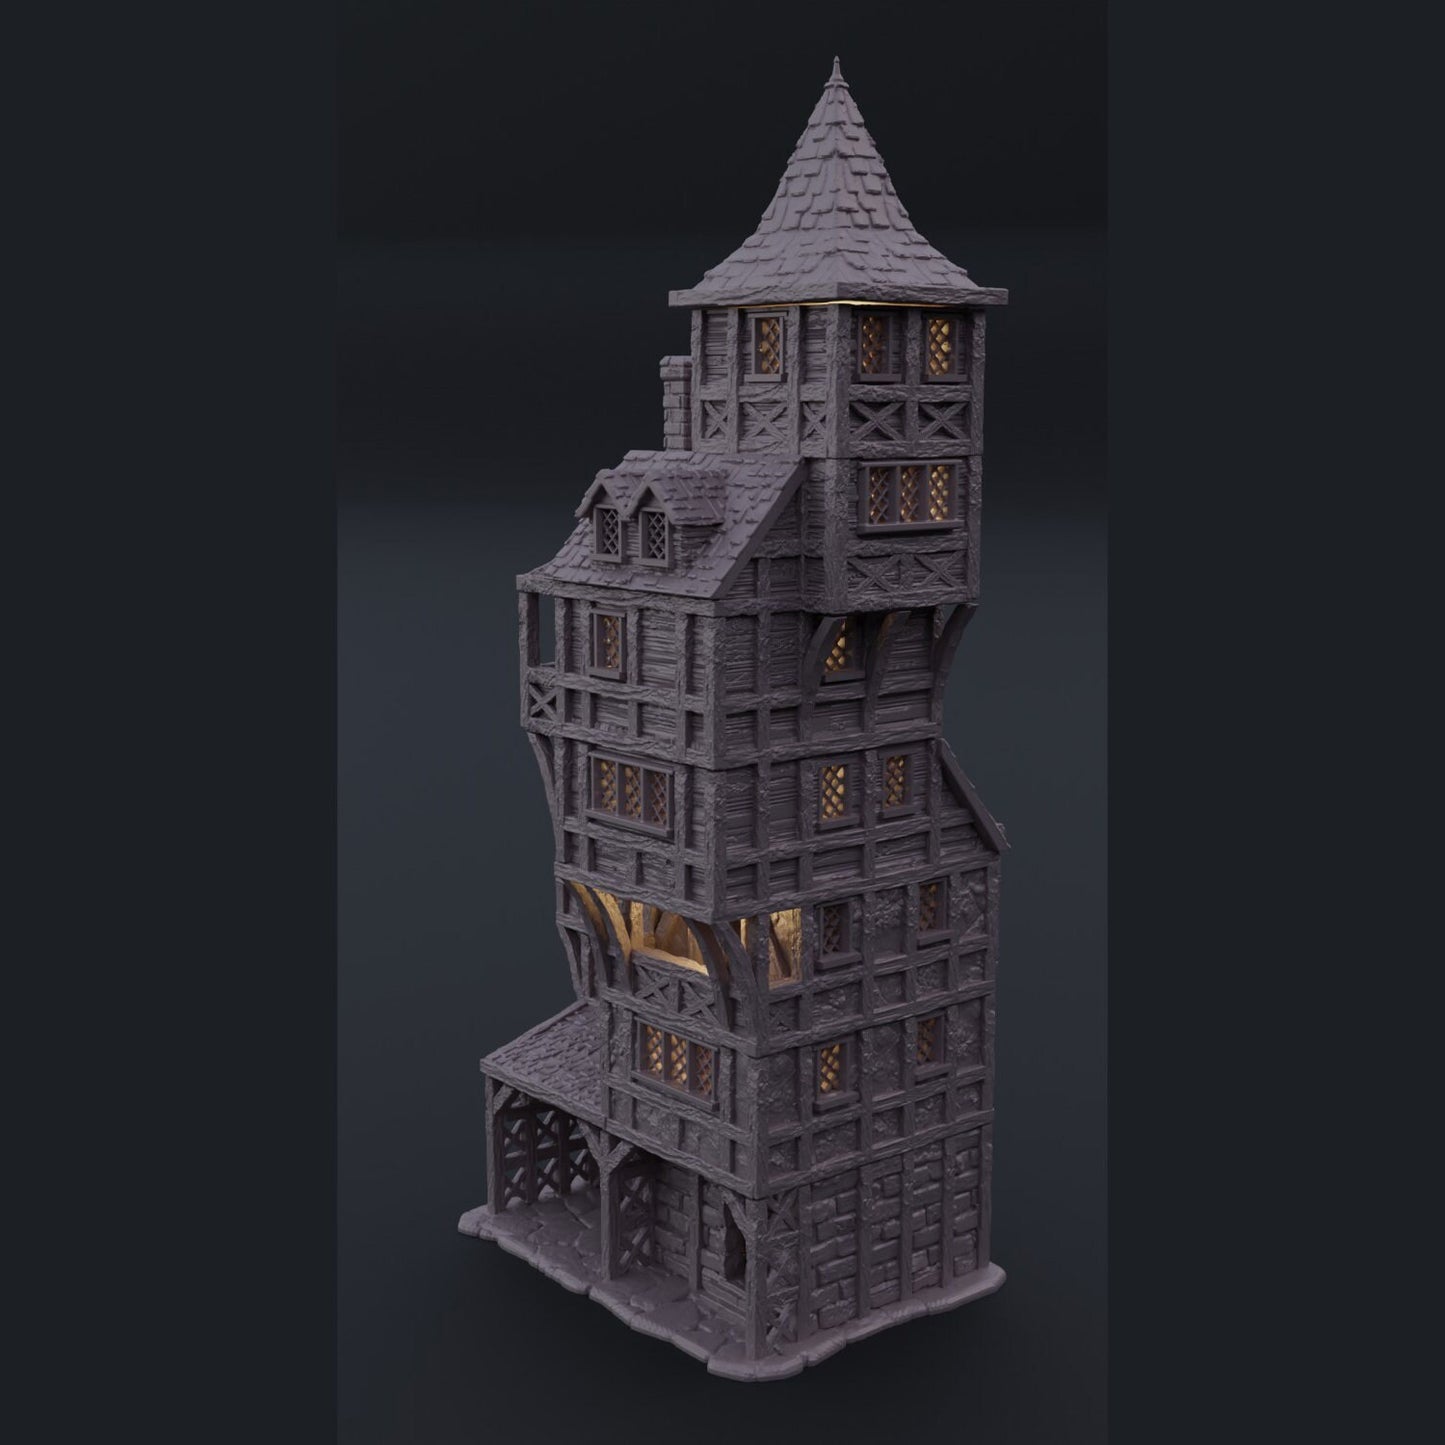 ClockTower, Mordheim, dungeons and Dragons, Ruined Elven, houses, Tabletop, Fantasy Terrain, Town Set, Town and Market, Mordheim Set, Wargaming, Dungeons and Dragons, Lord of the rings, RPG Set, Village Set, building set, small town, Market, town